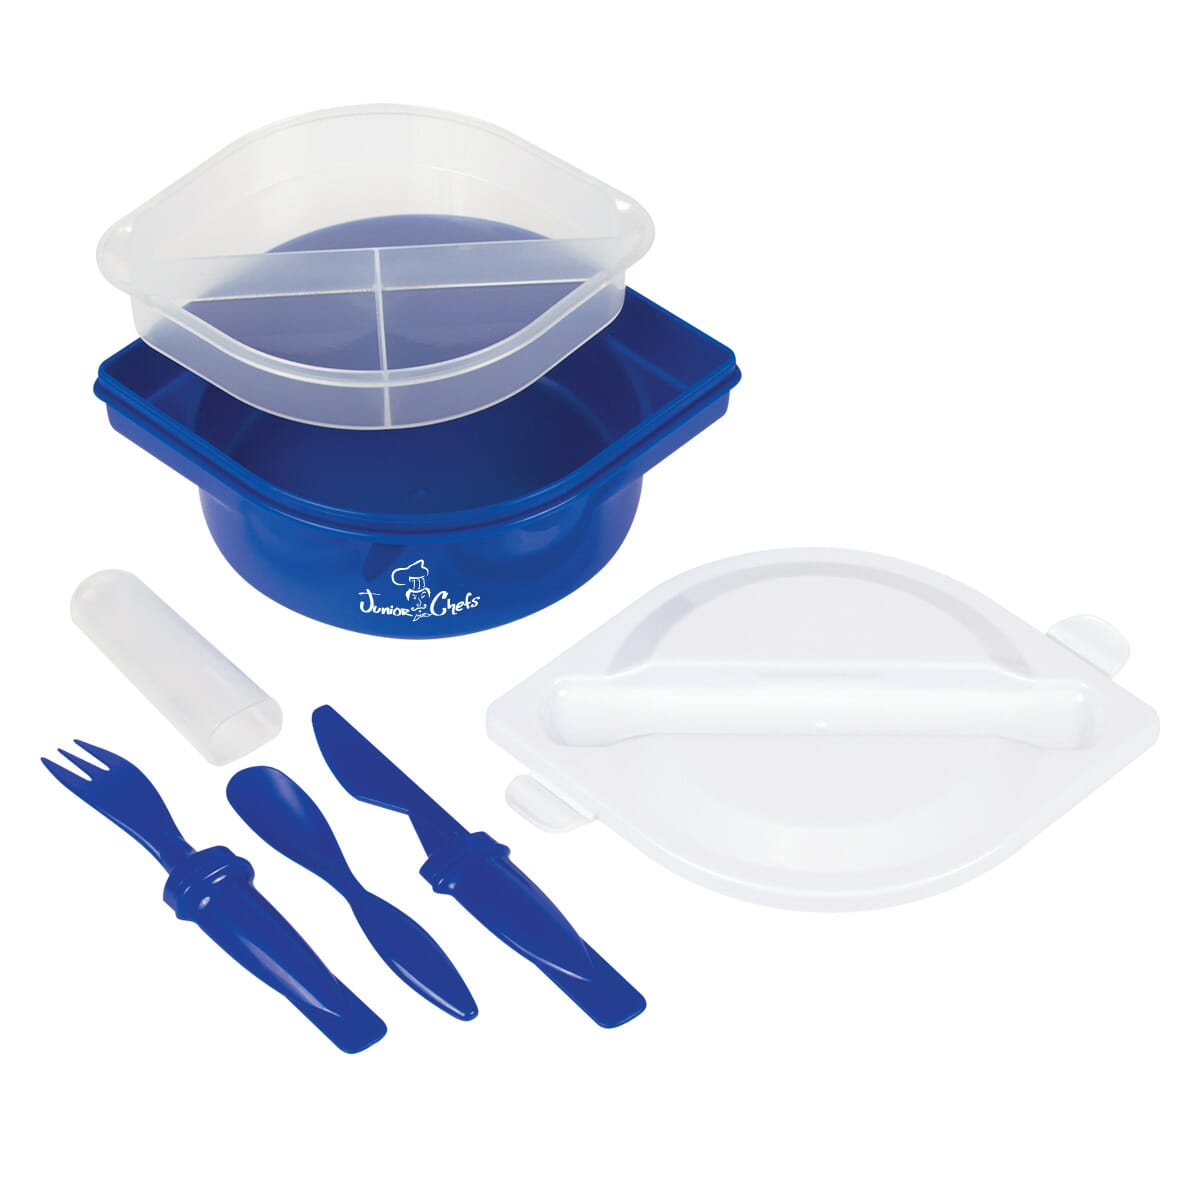 Multi-Compartment Food Container with Utensils - Promotional